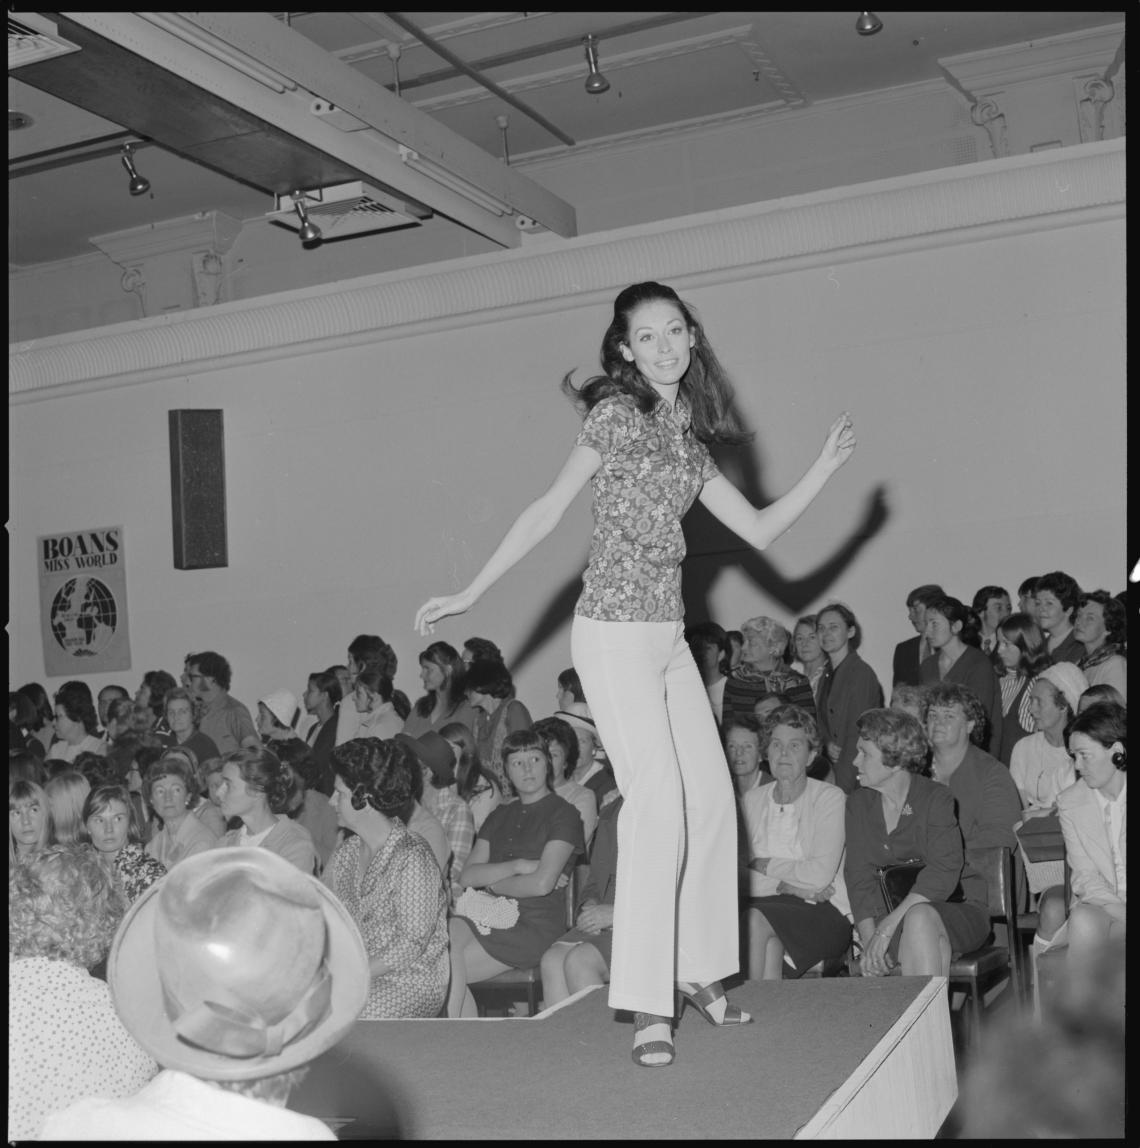 Miss World Fashion Show at Boans store 1970